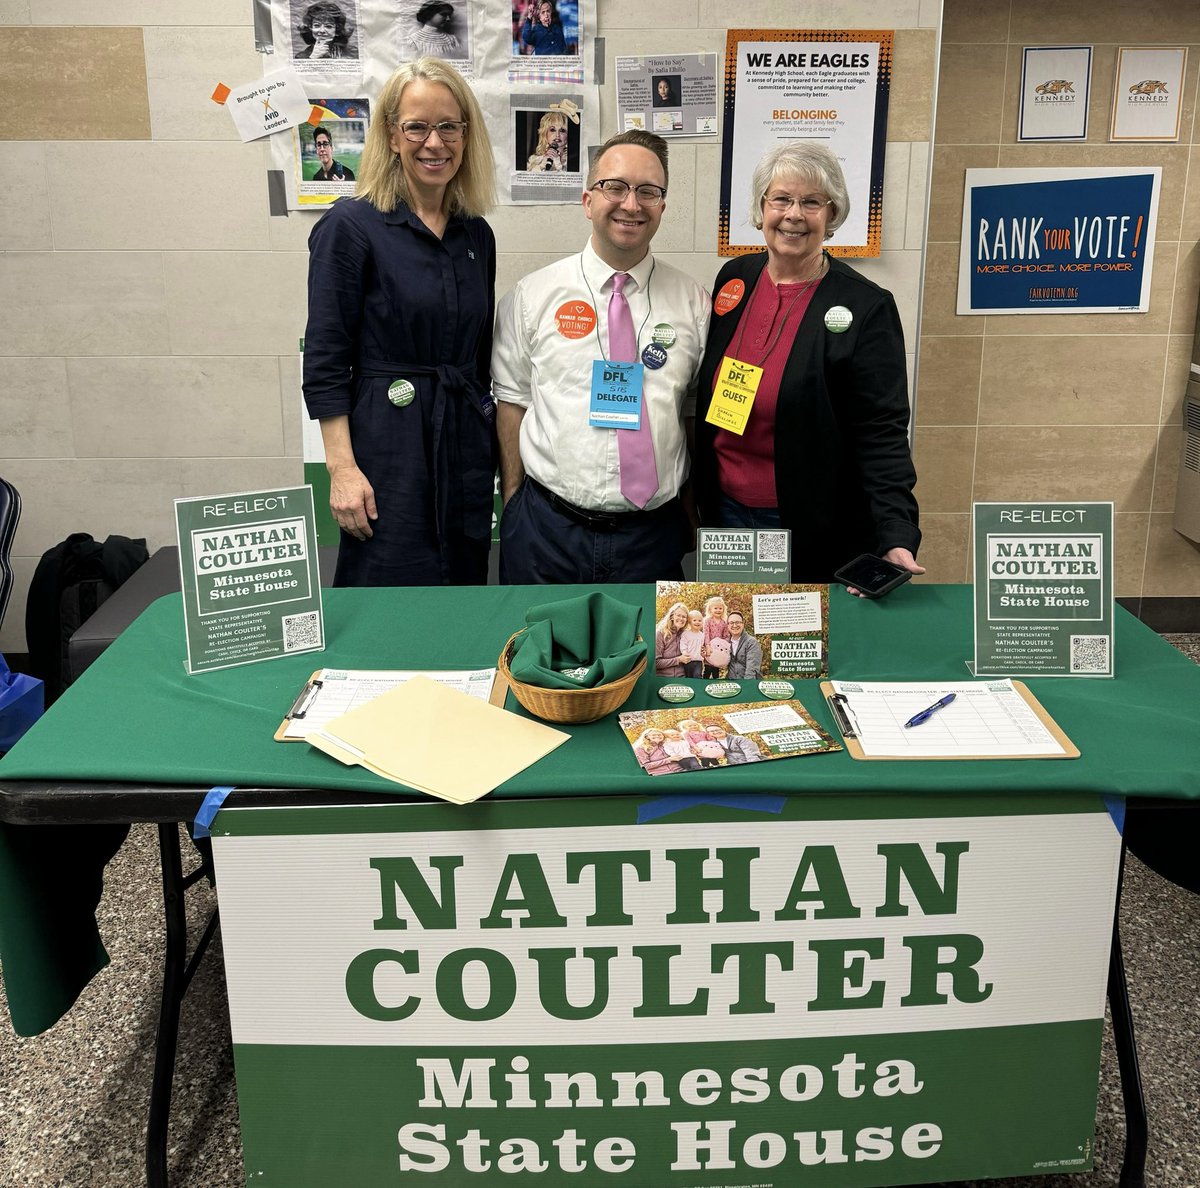 We started the morning at the @SD51DFL convention with coffee and donuts and great energy for DFL candidates up and down the ballot! Thank you for the warm welcome! #KellyForCongress #SD51 #MN03